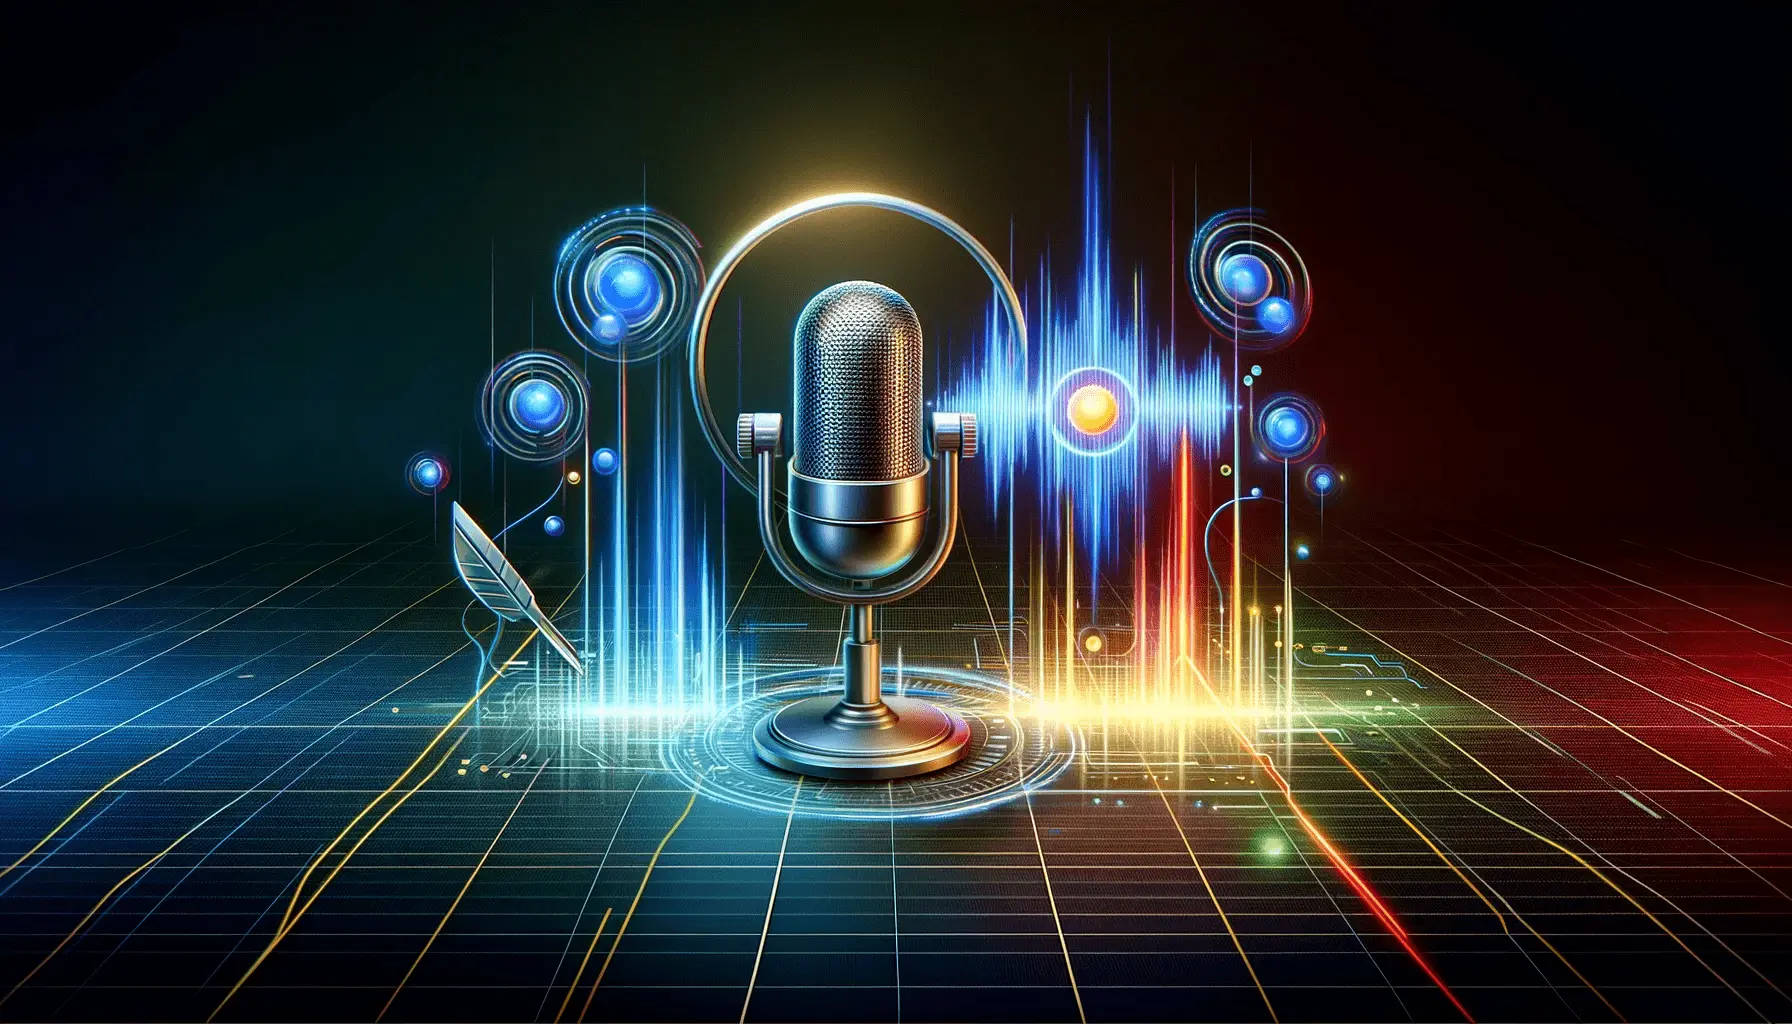 Audio-Only Ads & Podcast Features in Google Ads